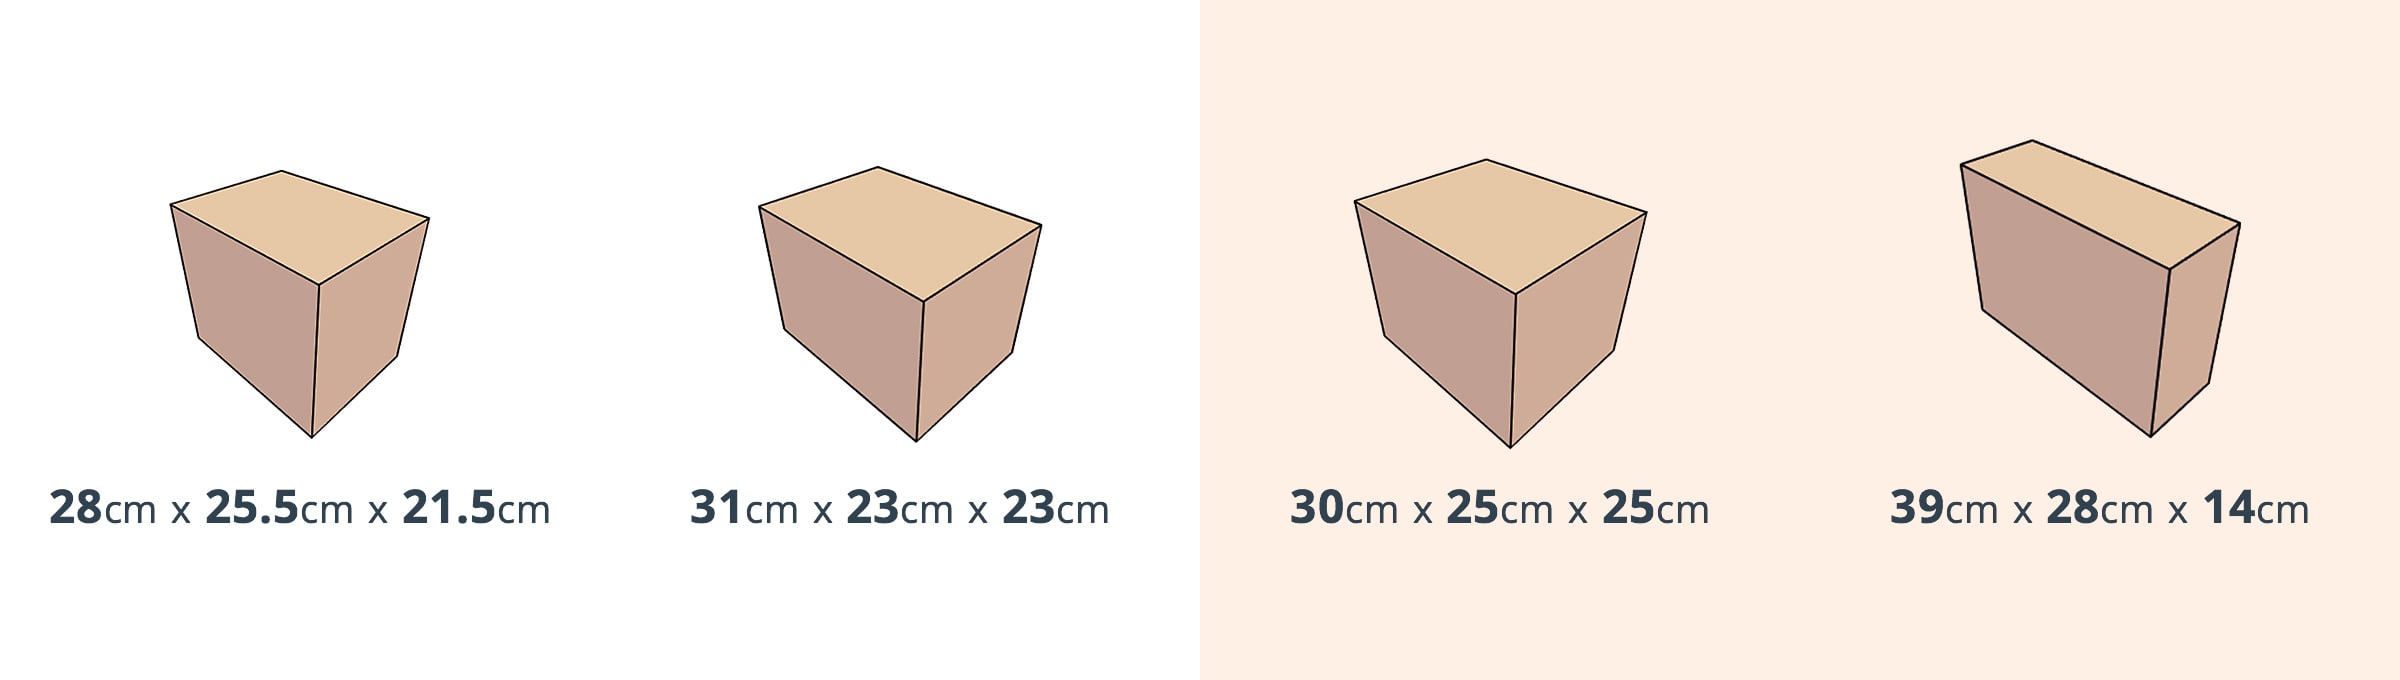 Briefcase size packaging dimensions